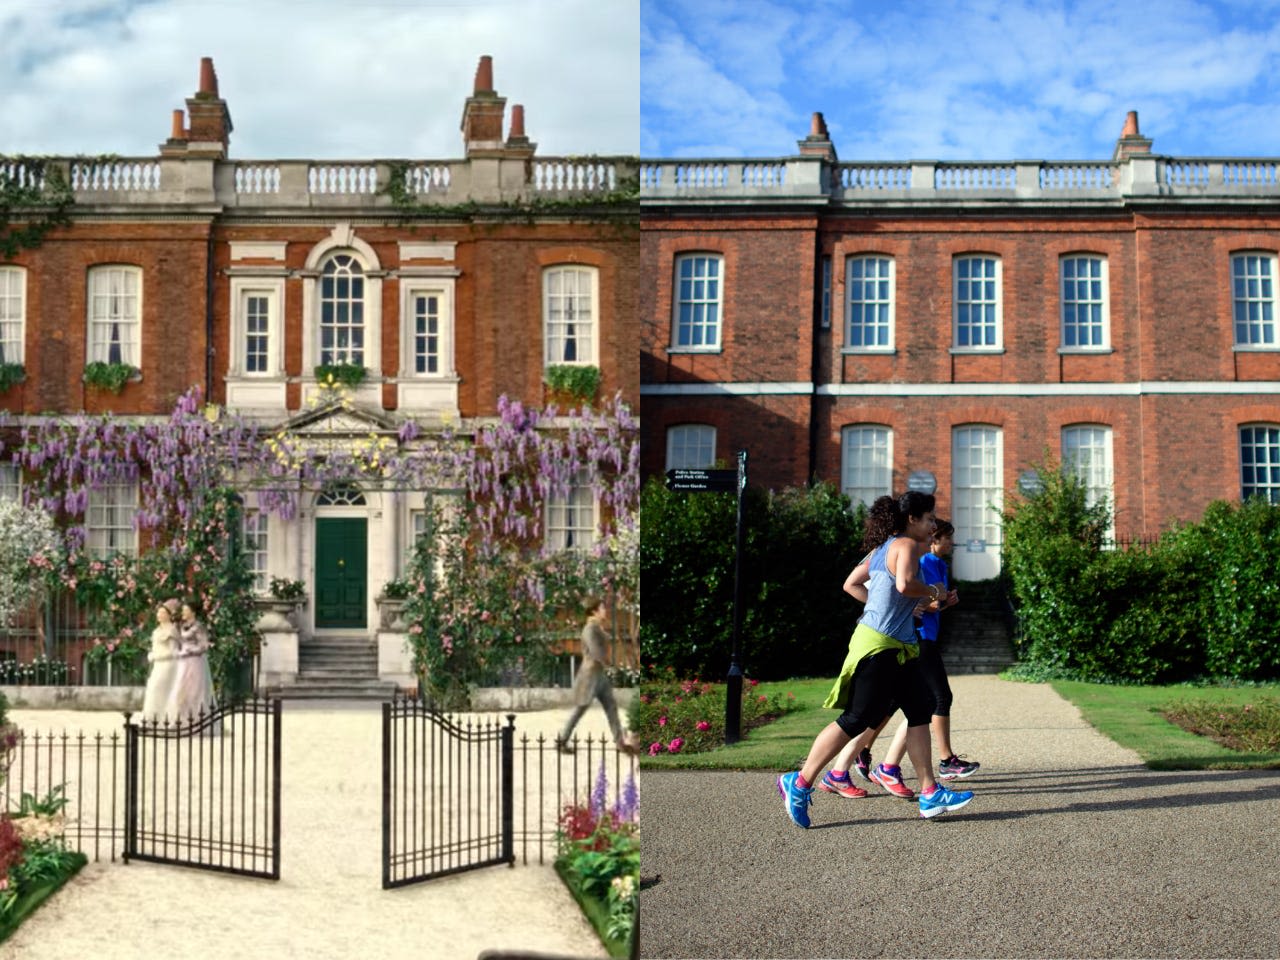 Photos show what 15 different mansions, palaces, and parks in 'Bridgerton' look like in real life